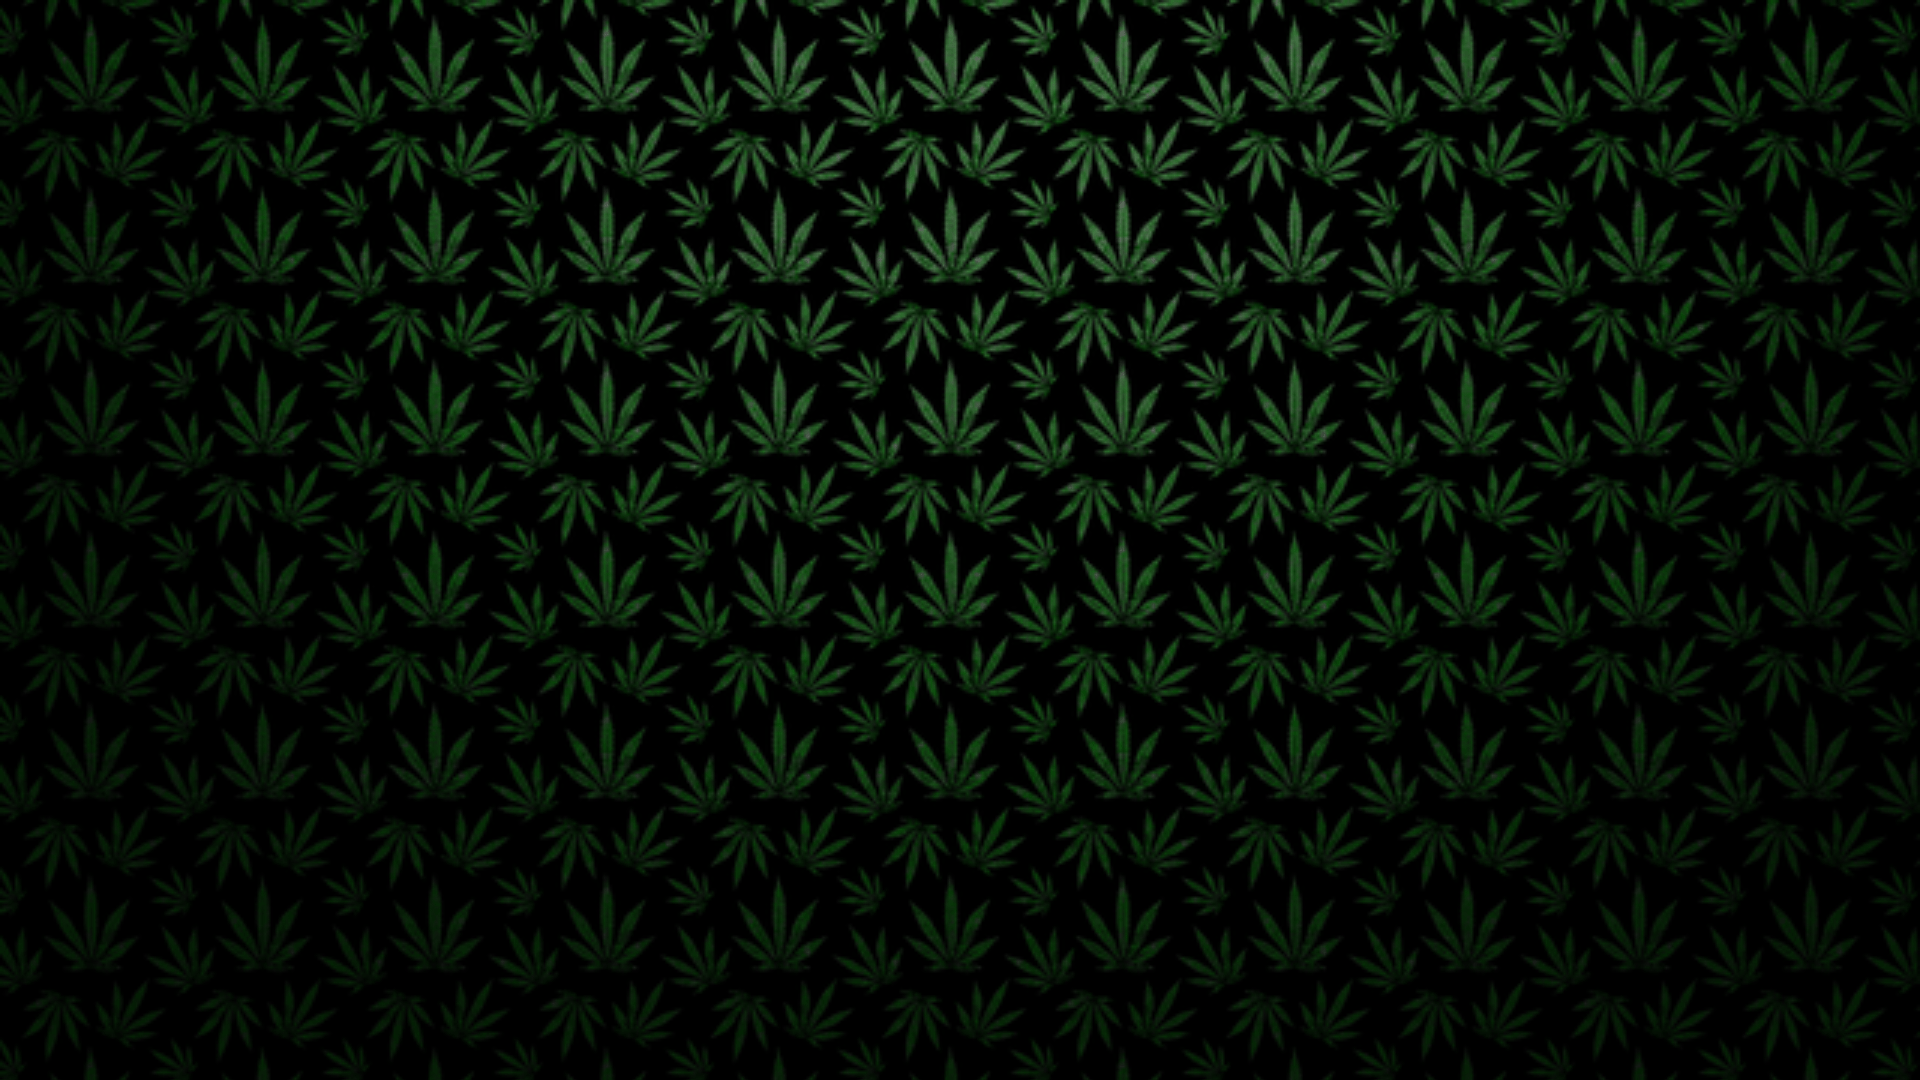 A green cannabis leaf pattern on a black background - Weed